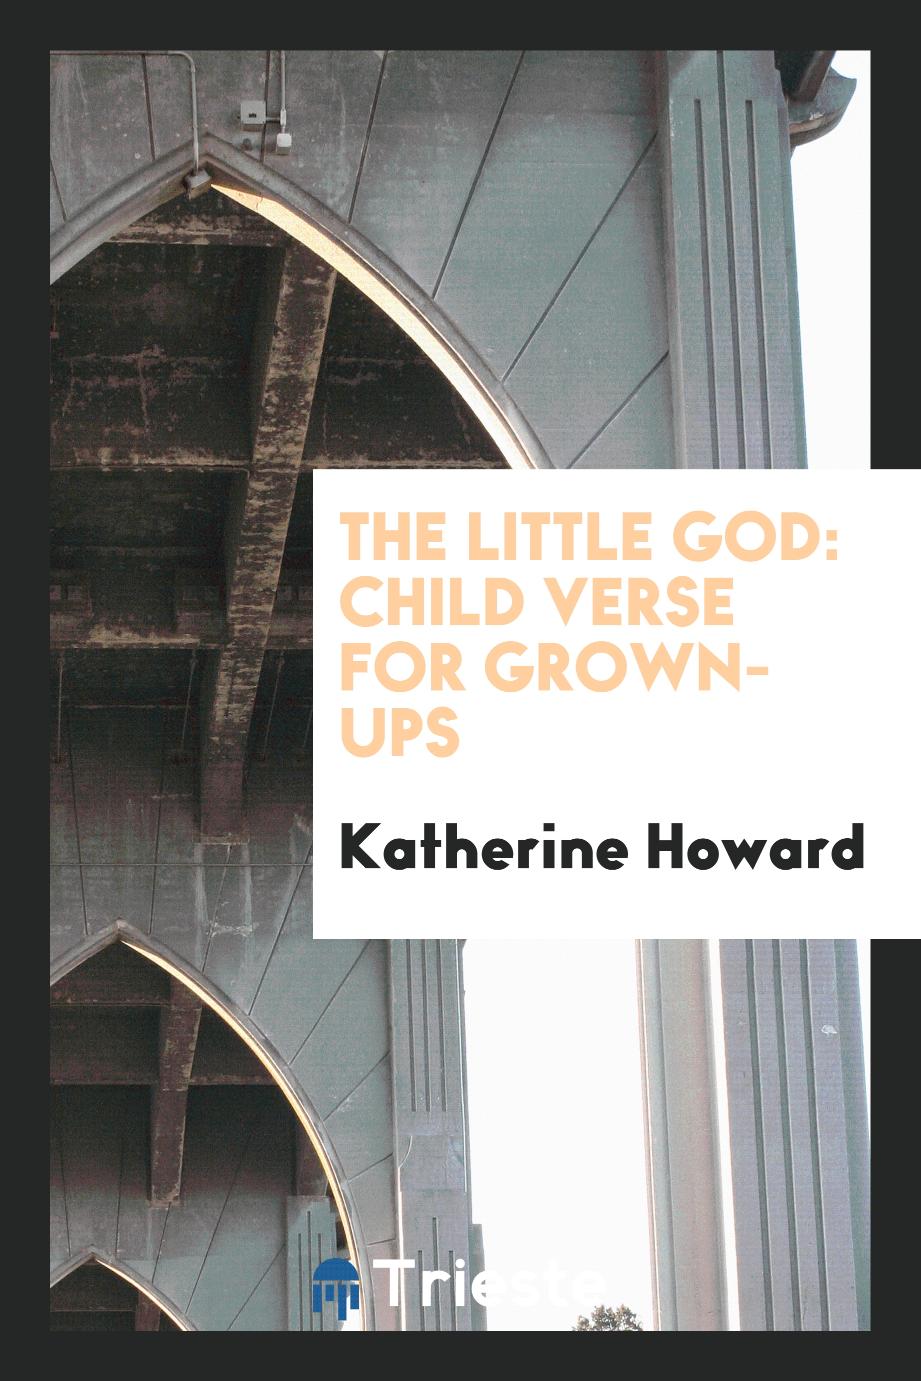 The Little God: Child Verse for Grown-ups